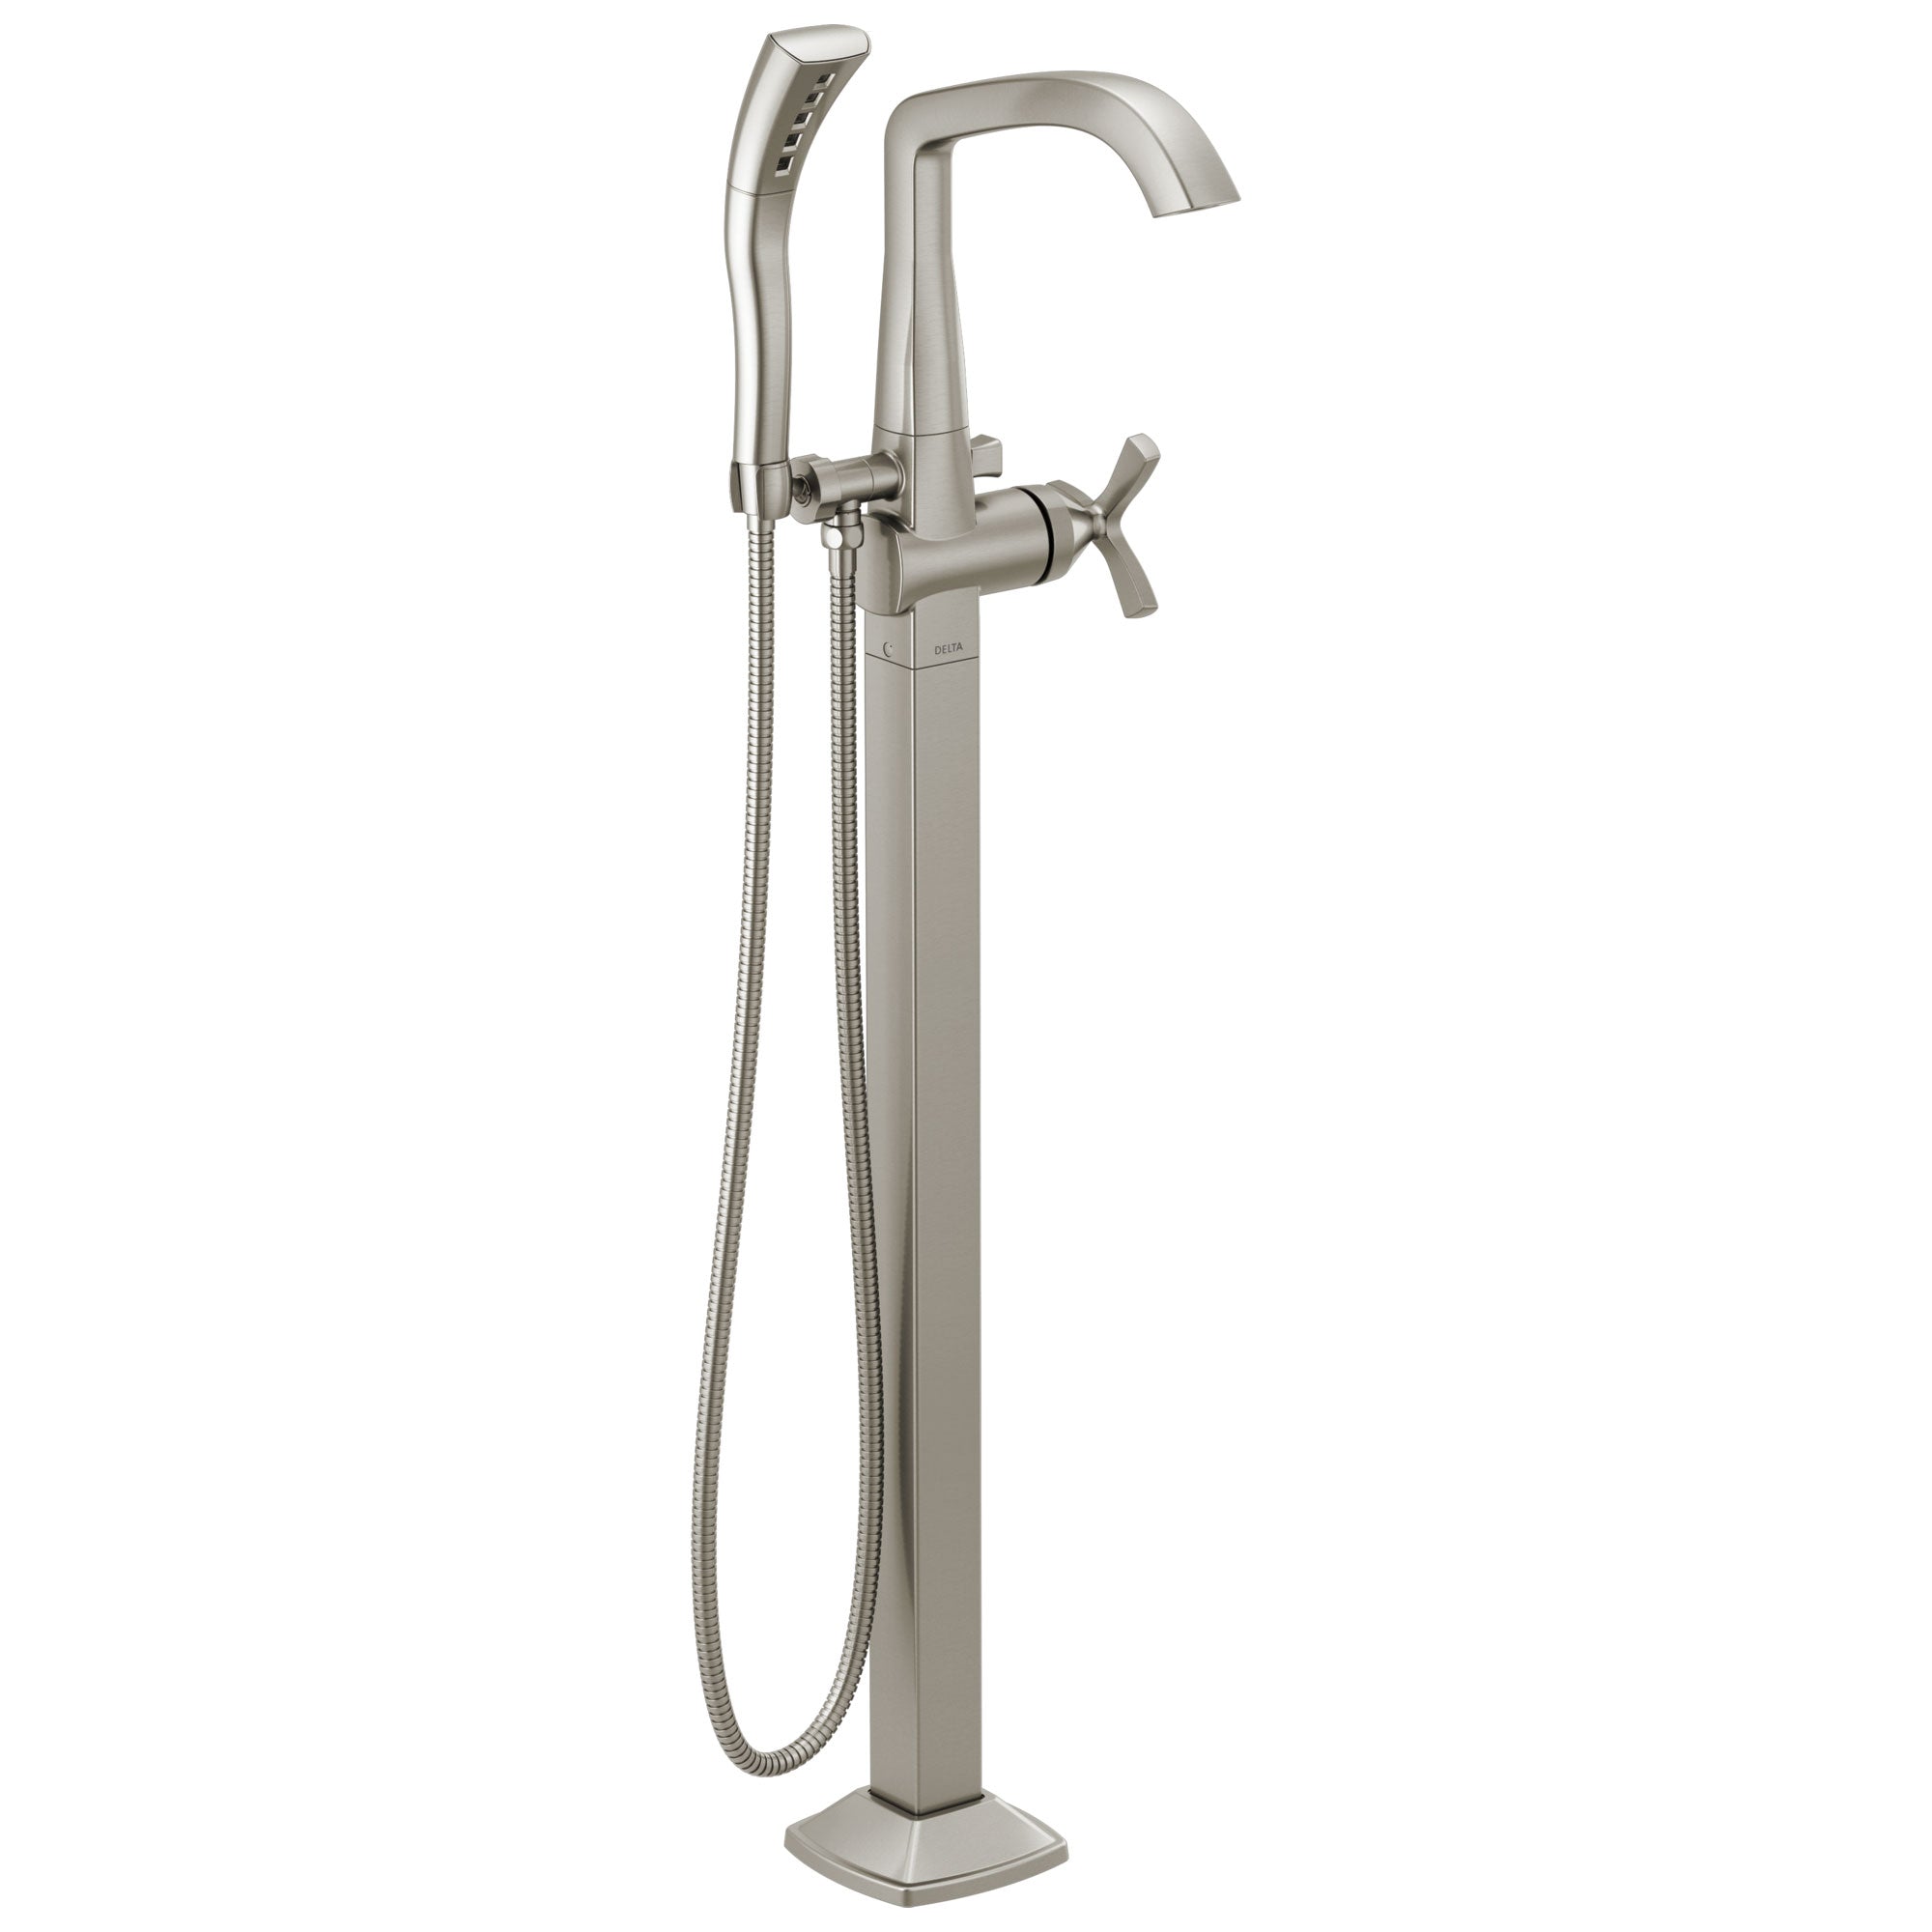 Delta Stryke Stainless Steel Finish Single Helo Cross Handle Floor Mount Tub Filler Faucet with Hand Sprayer Includes Rough-in Valve D3041V